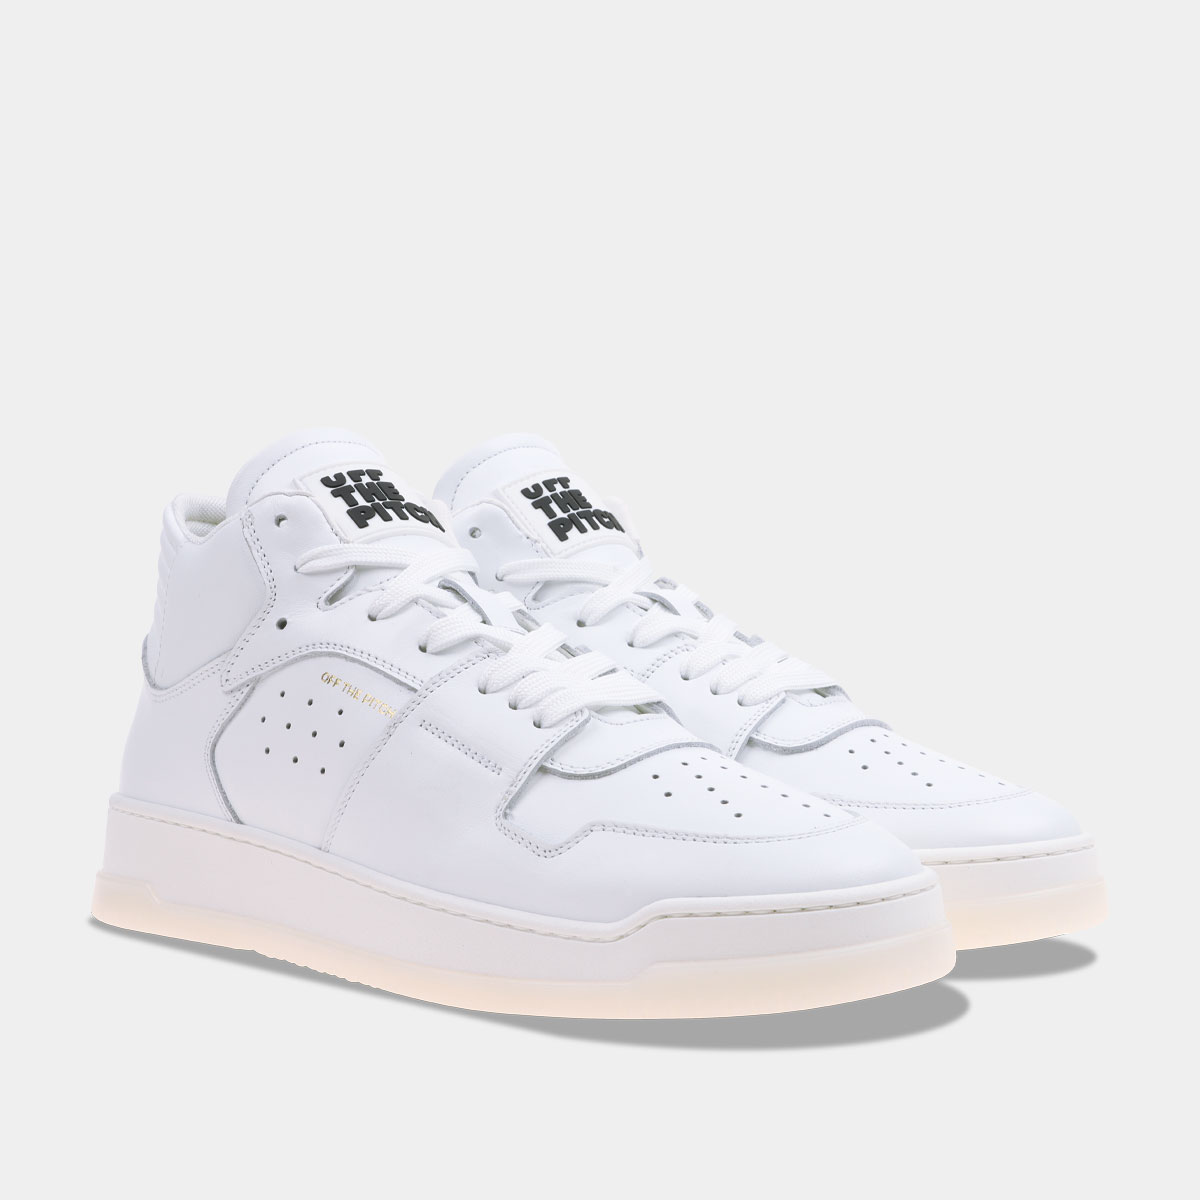 Off the Pitch Supernova Mid White unisex sneakers